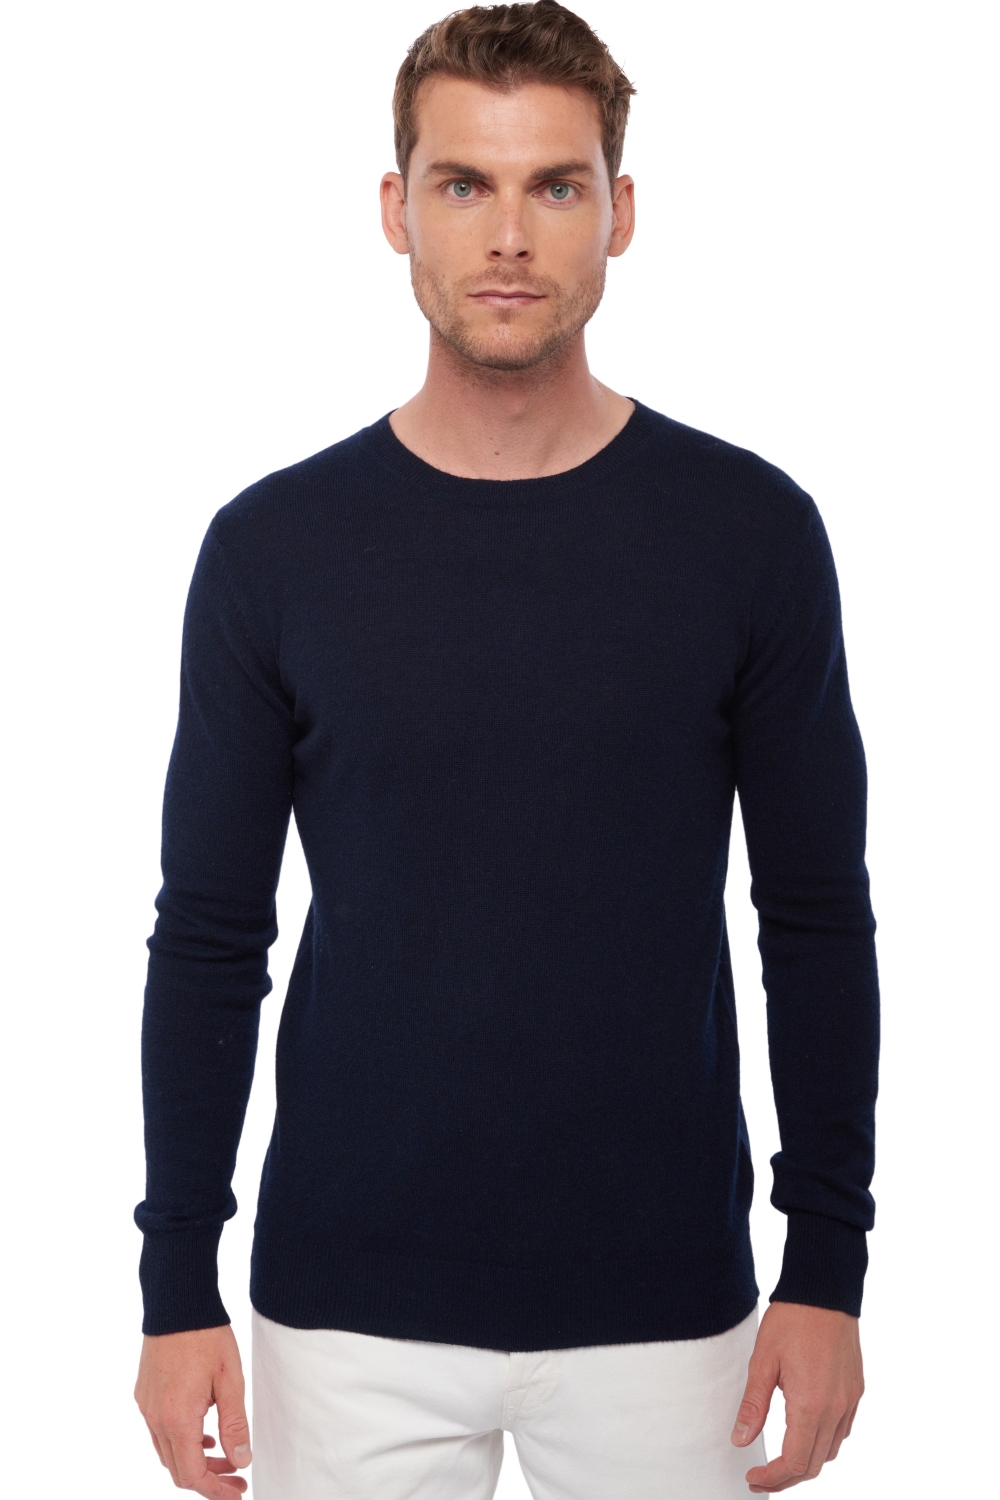 Cachemire petits prix homme tao first marine fonce 2xl